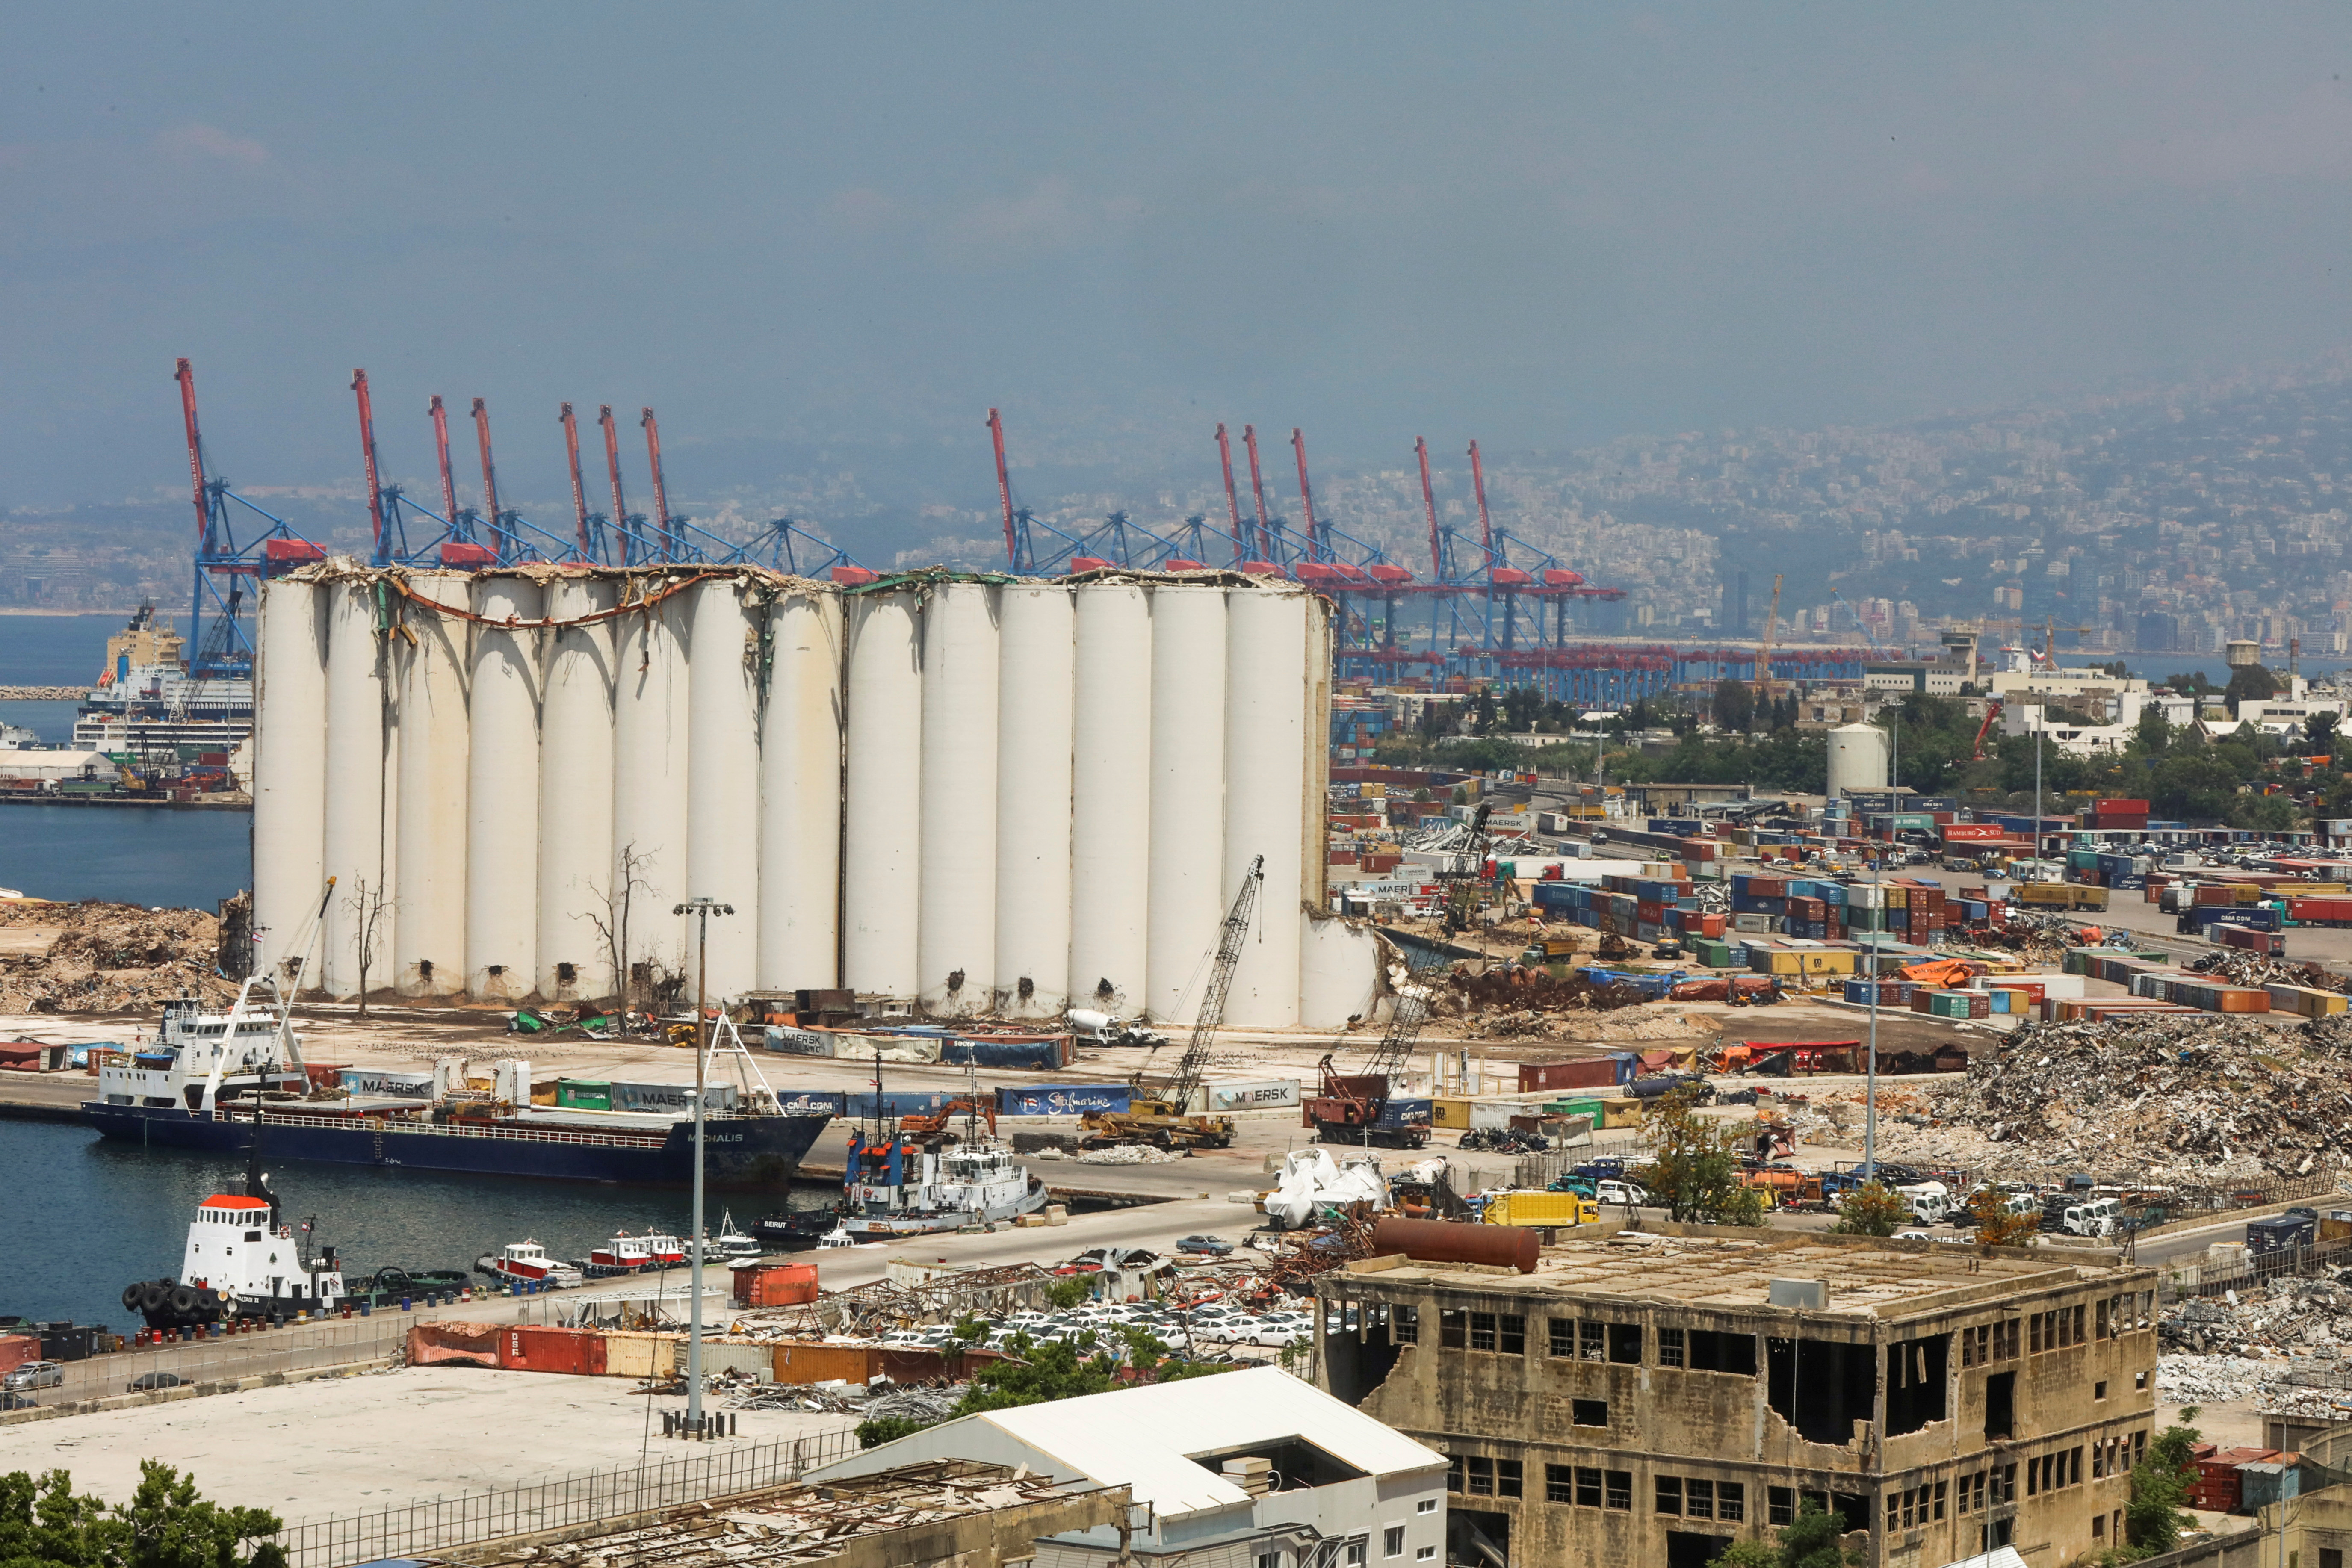 A general view shows the Beirut silos damaged in the August 2020 port blast